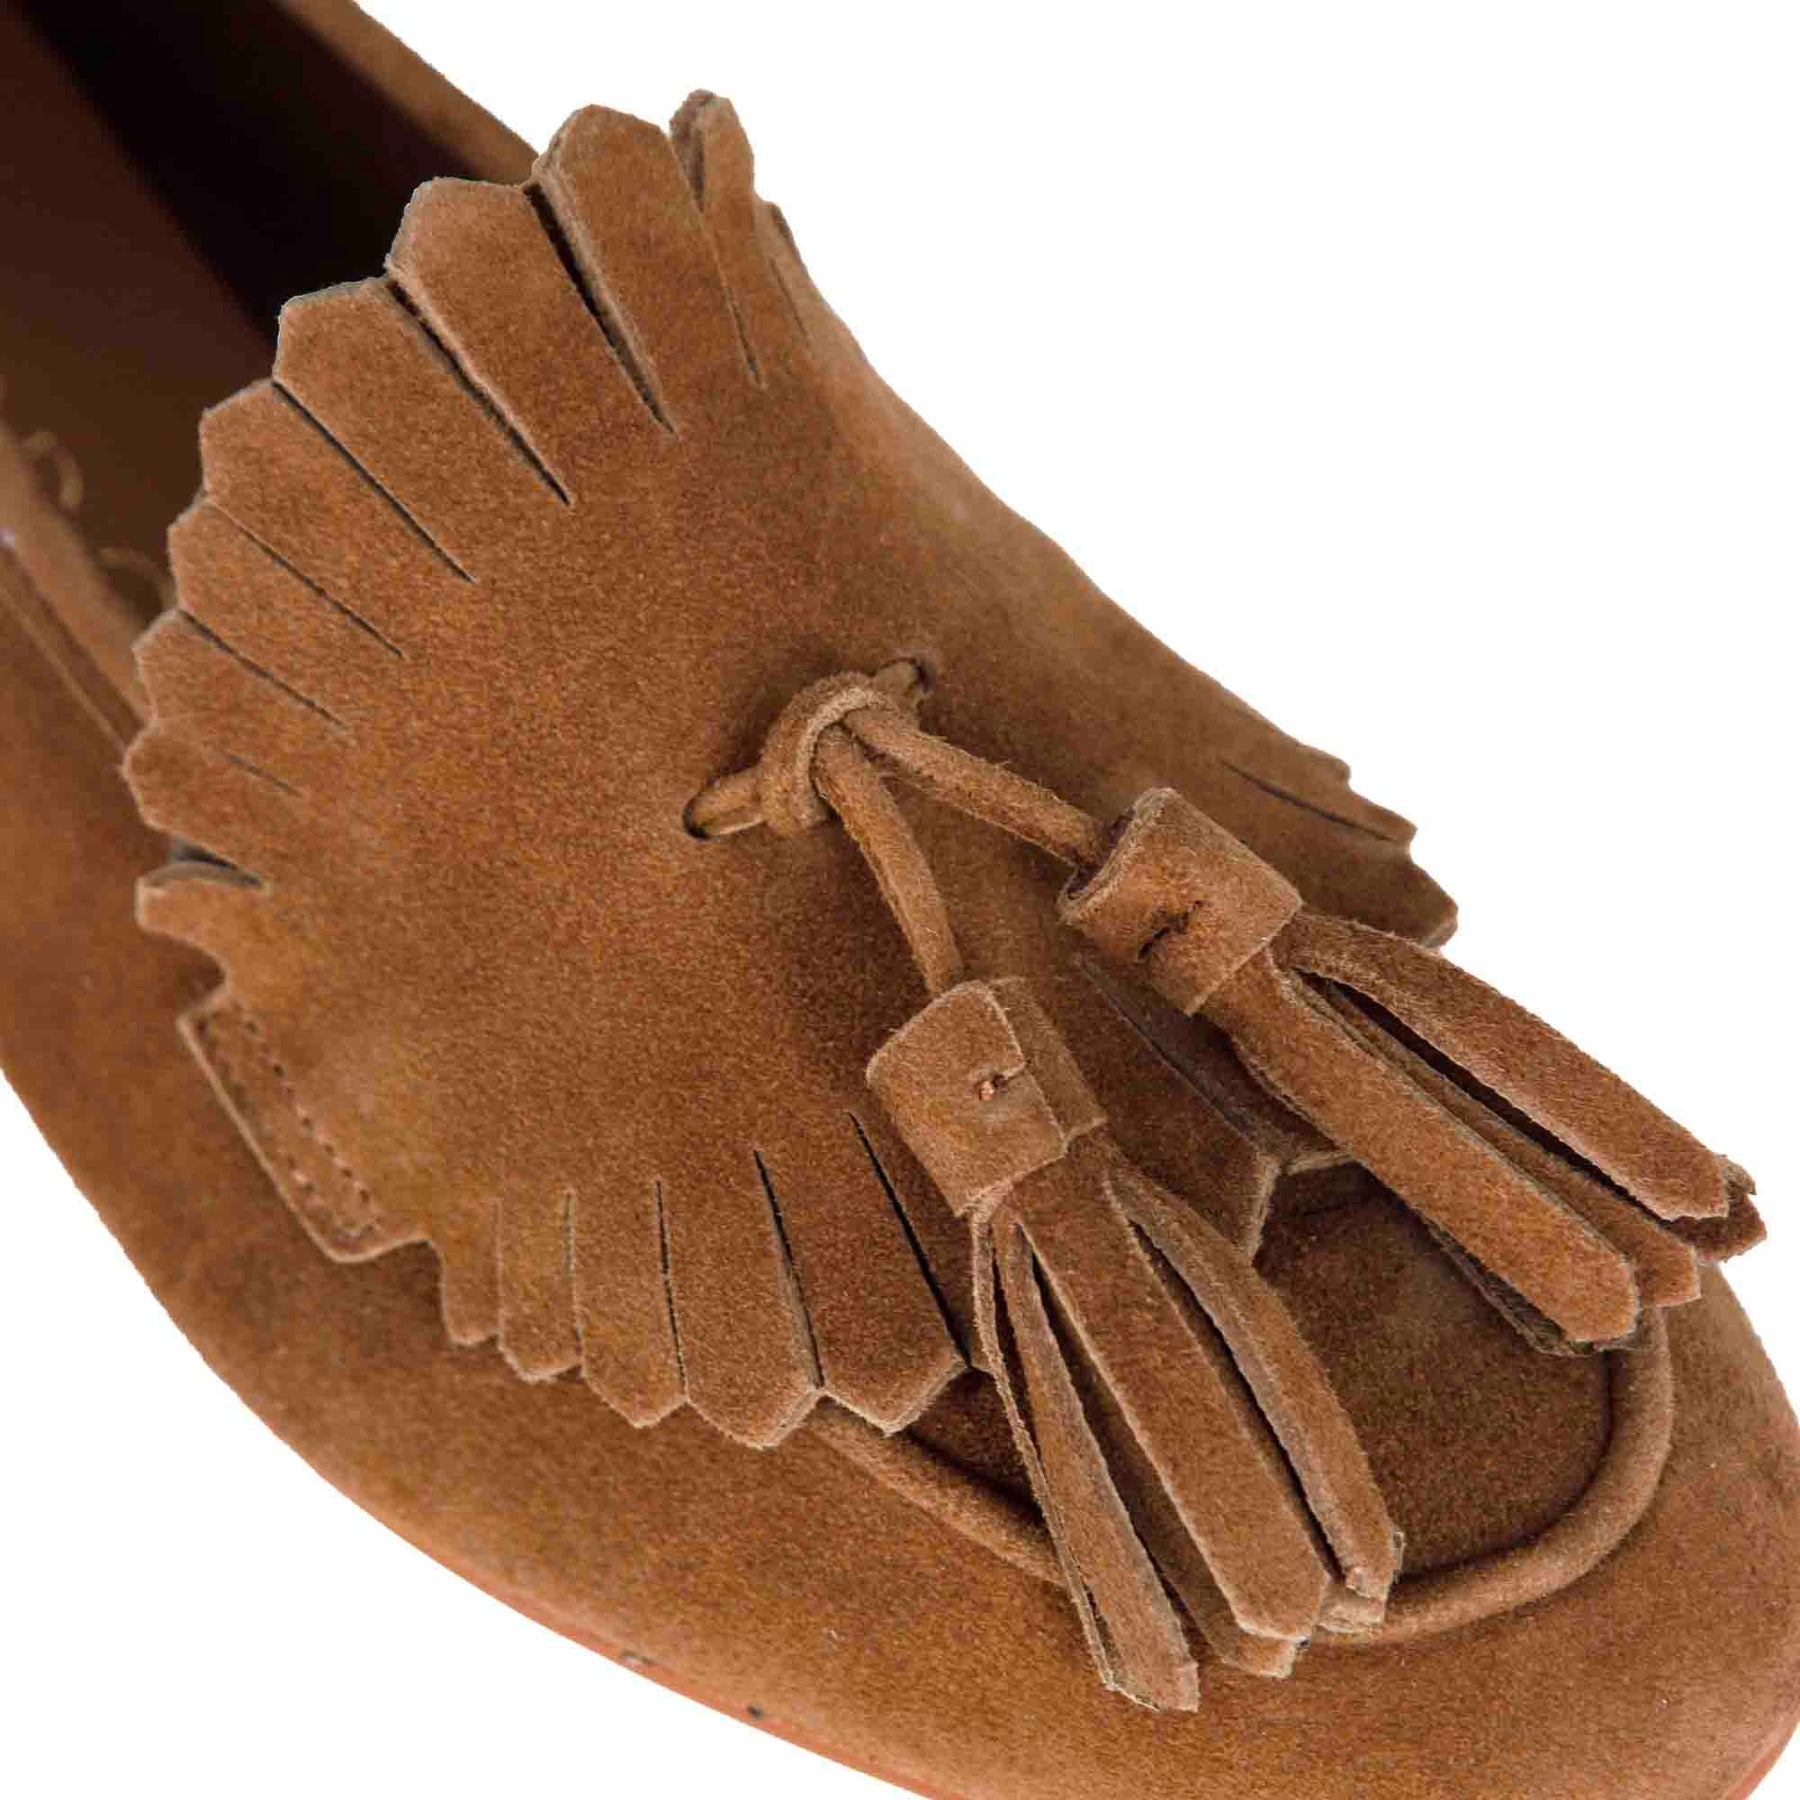 Classic women's moccasin in suede with brown tassels